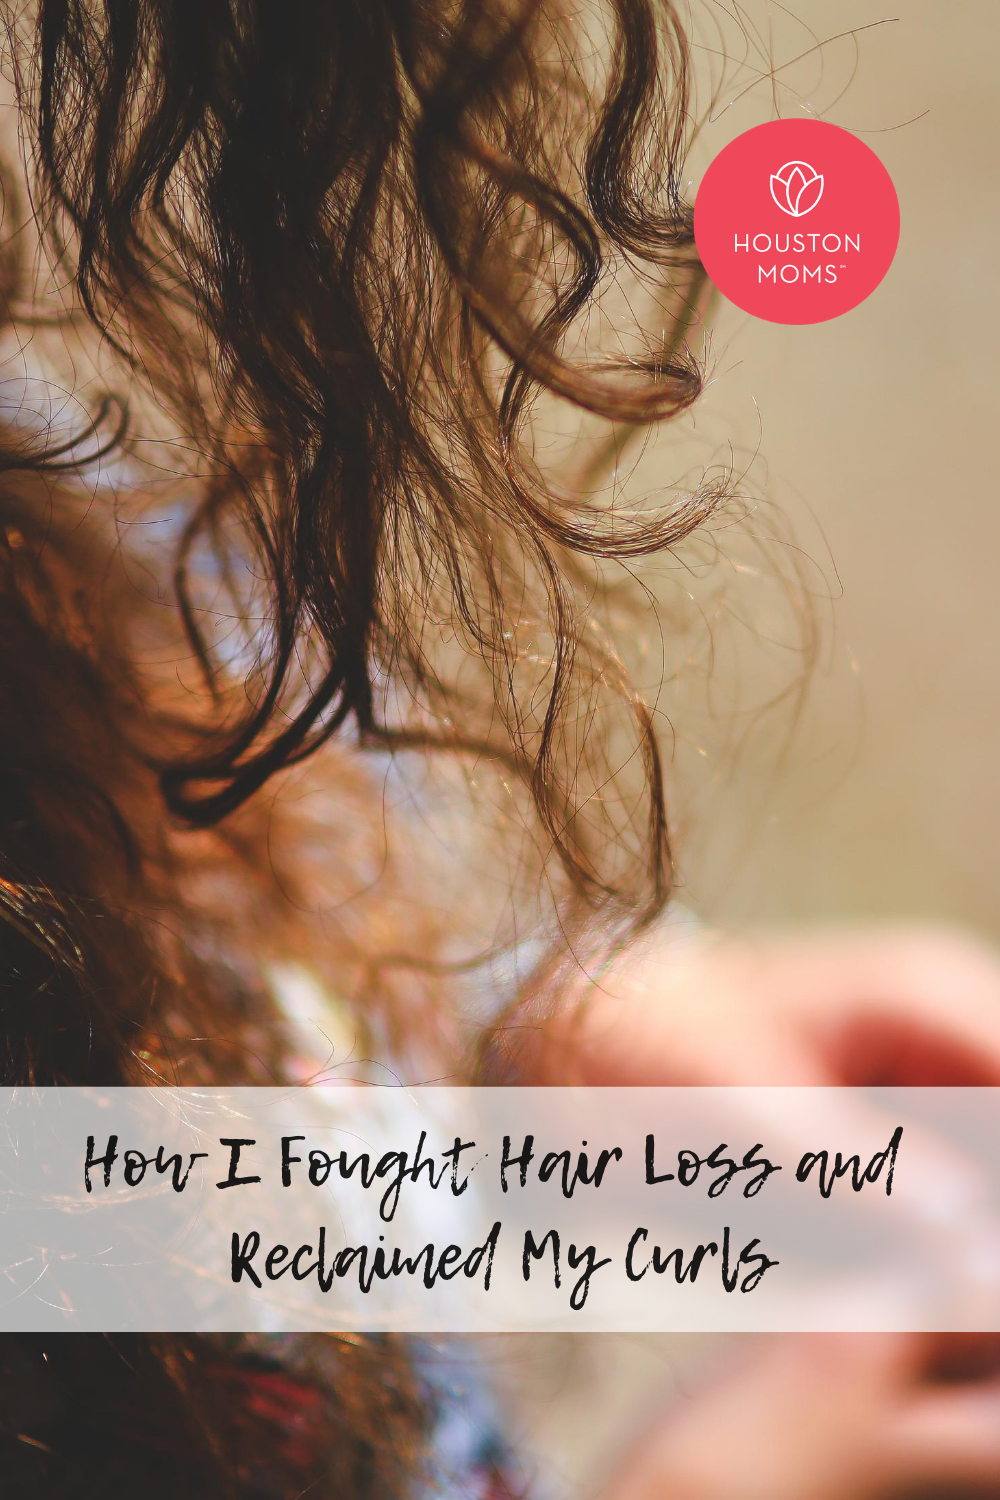 Houston Moms "How I Fought Hair Loss and Reclaimed My Curls" #houstonmoms #houstonmomsblog #momsaroundhouston